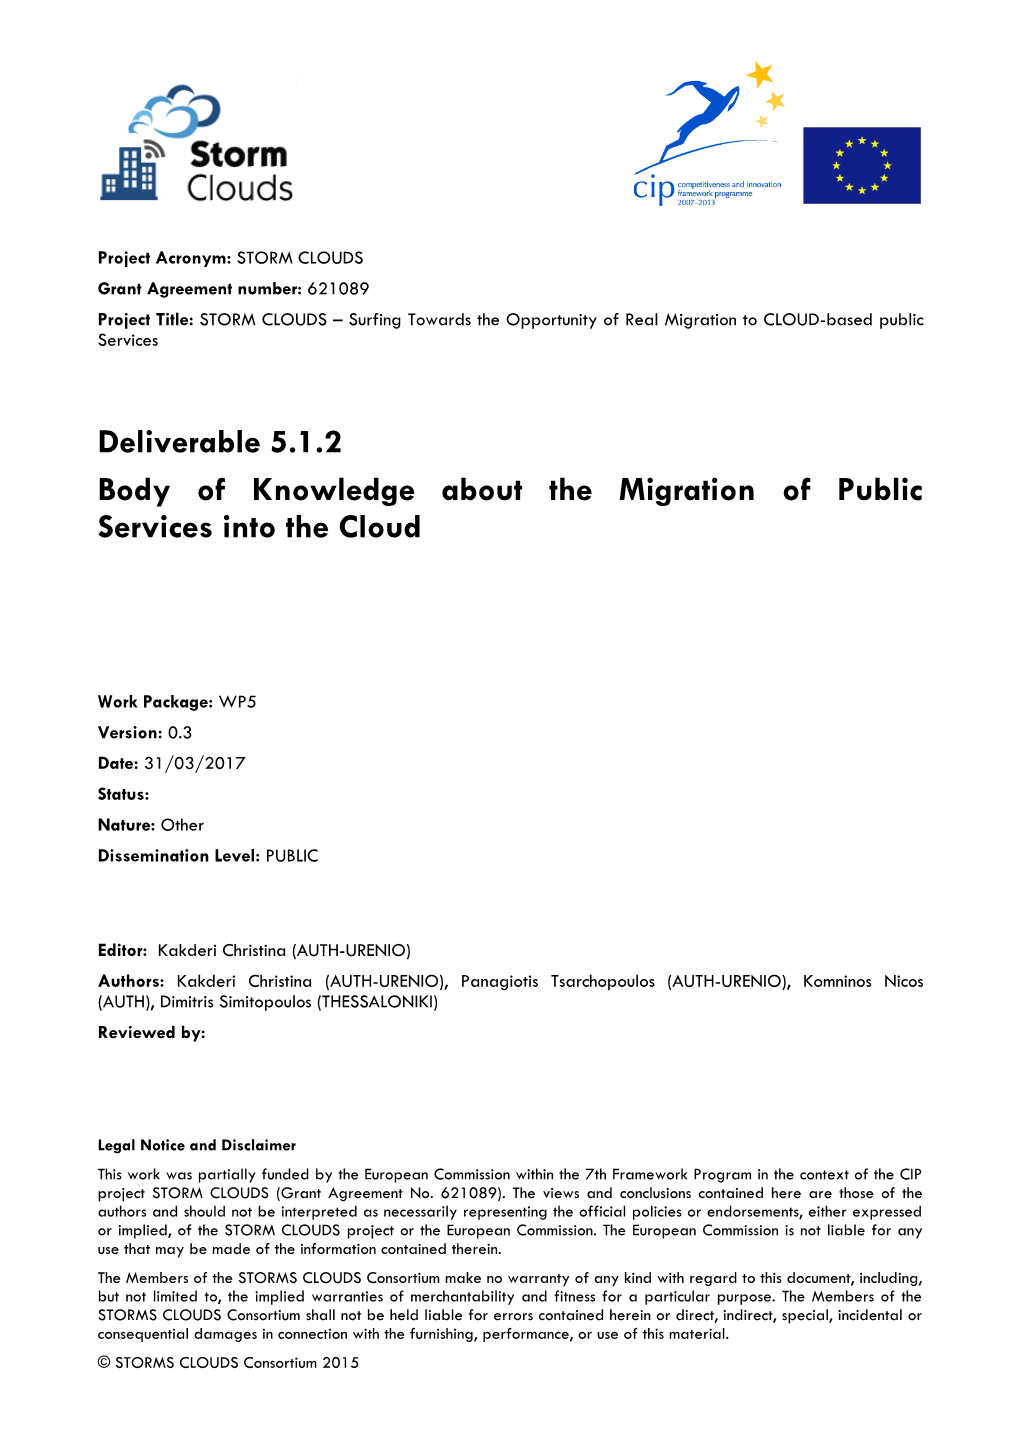 Deliverable 5.1.2 Body of Knowledge About the Migration of Public Services Into the Cloud